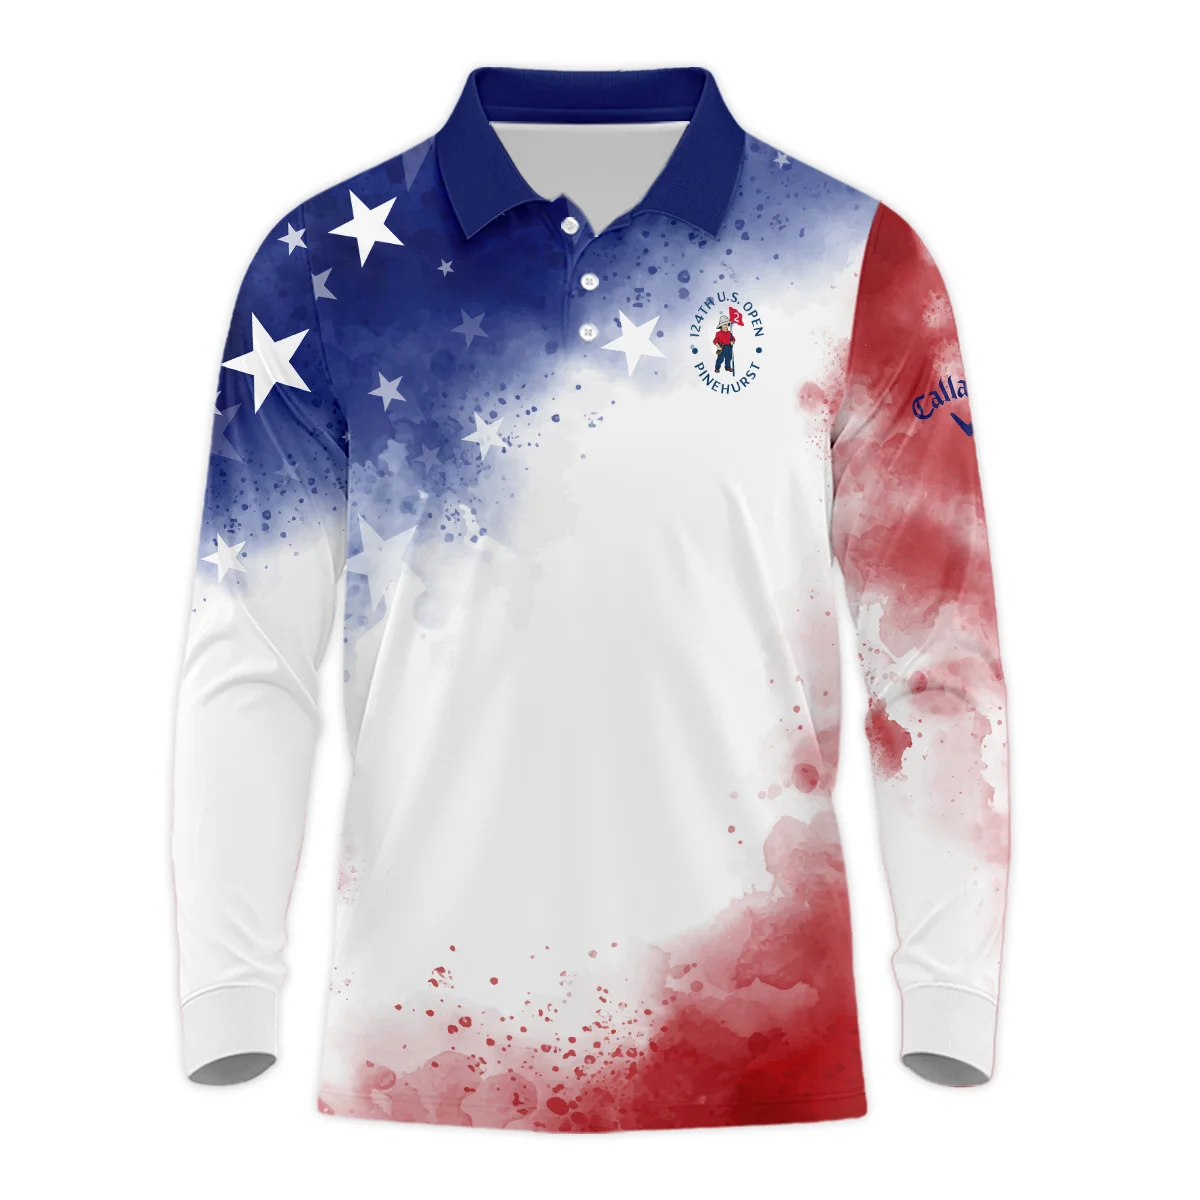 124th U.S. Open Pinehurst Callaway Blue Red Watercolor Star White Backgound Vneck Polo Shirt Style Classic Polo Shirt For Men